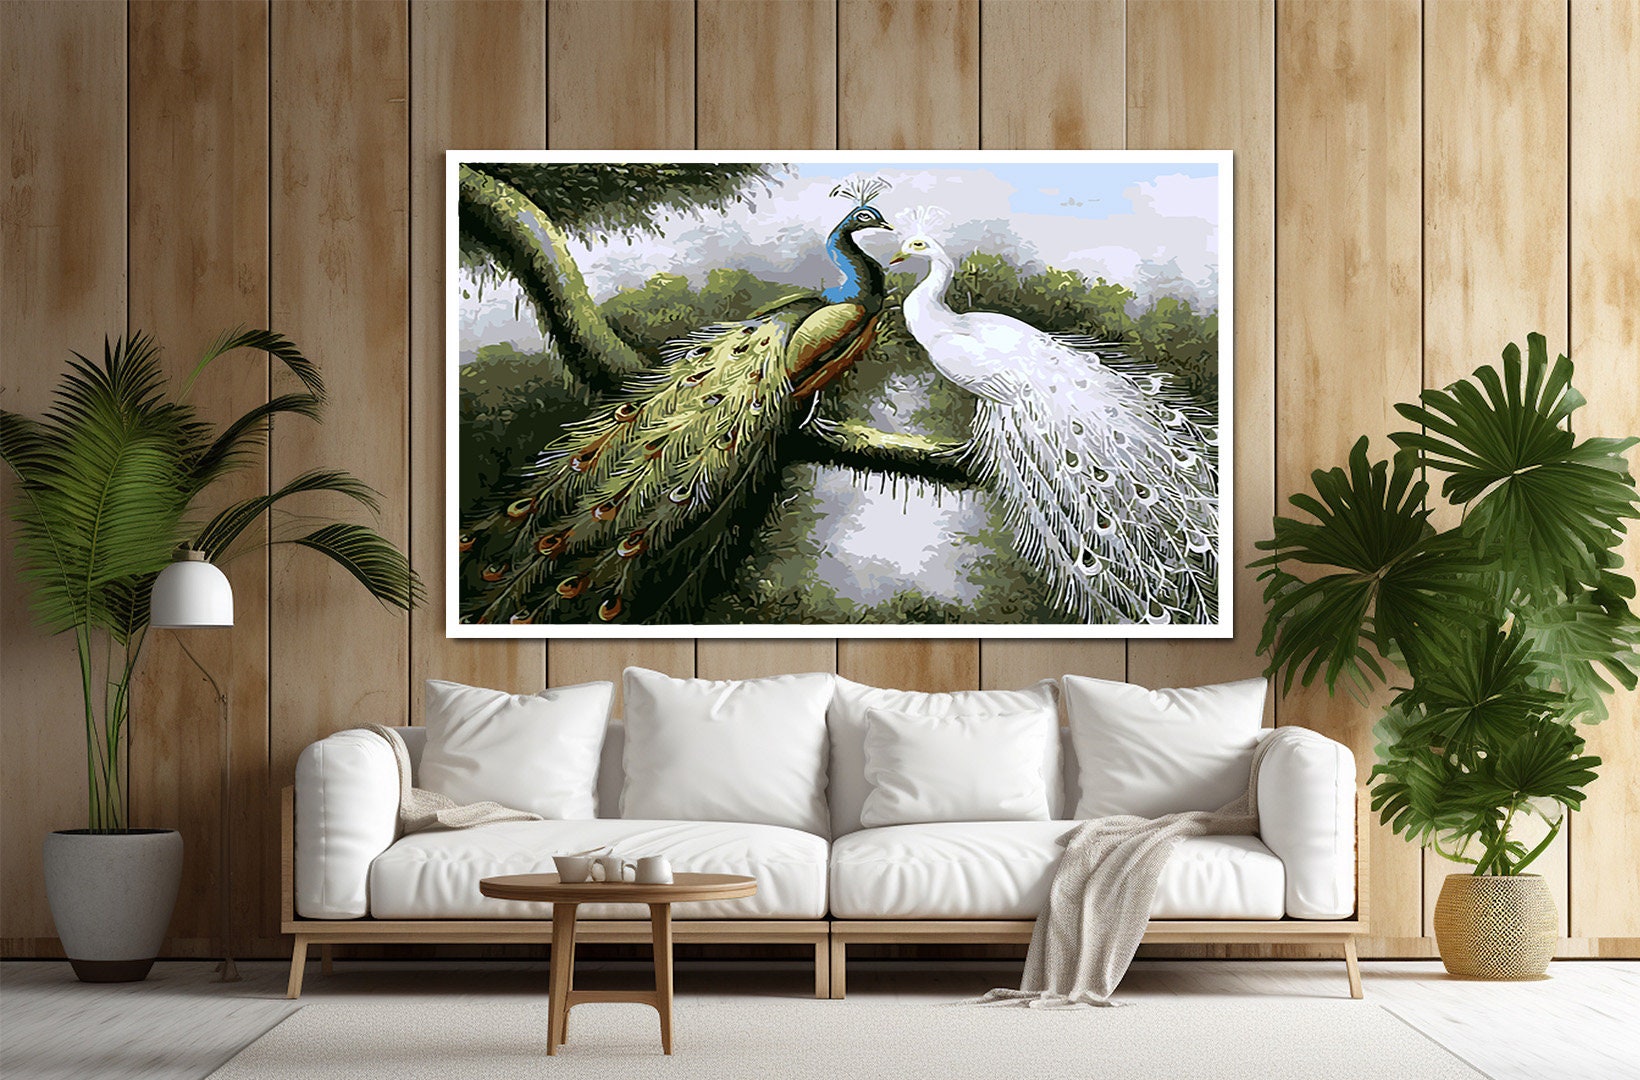  White Pecock Art Poster Canvas Prints Wall Art For Home Office  Decorations With Framed 13x8: Posters & Prints